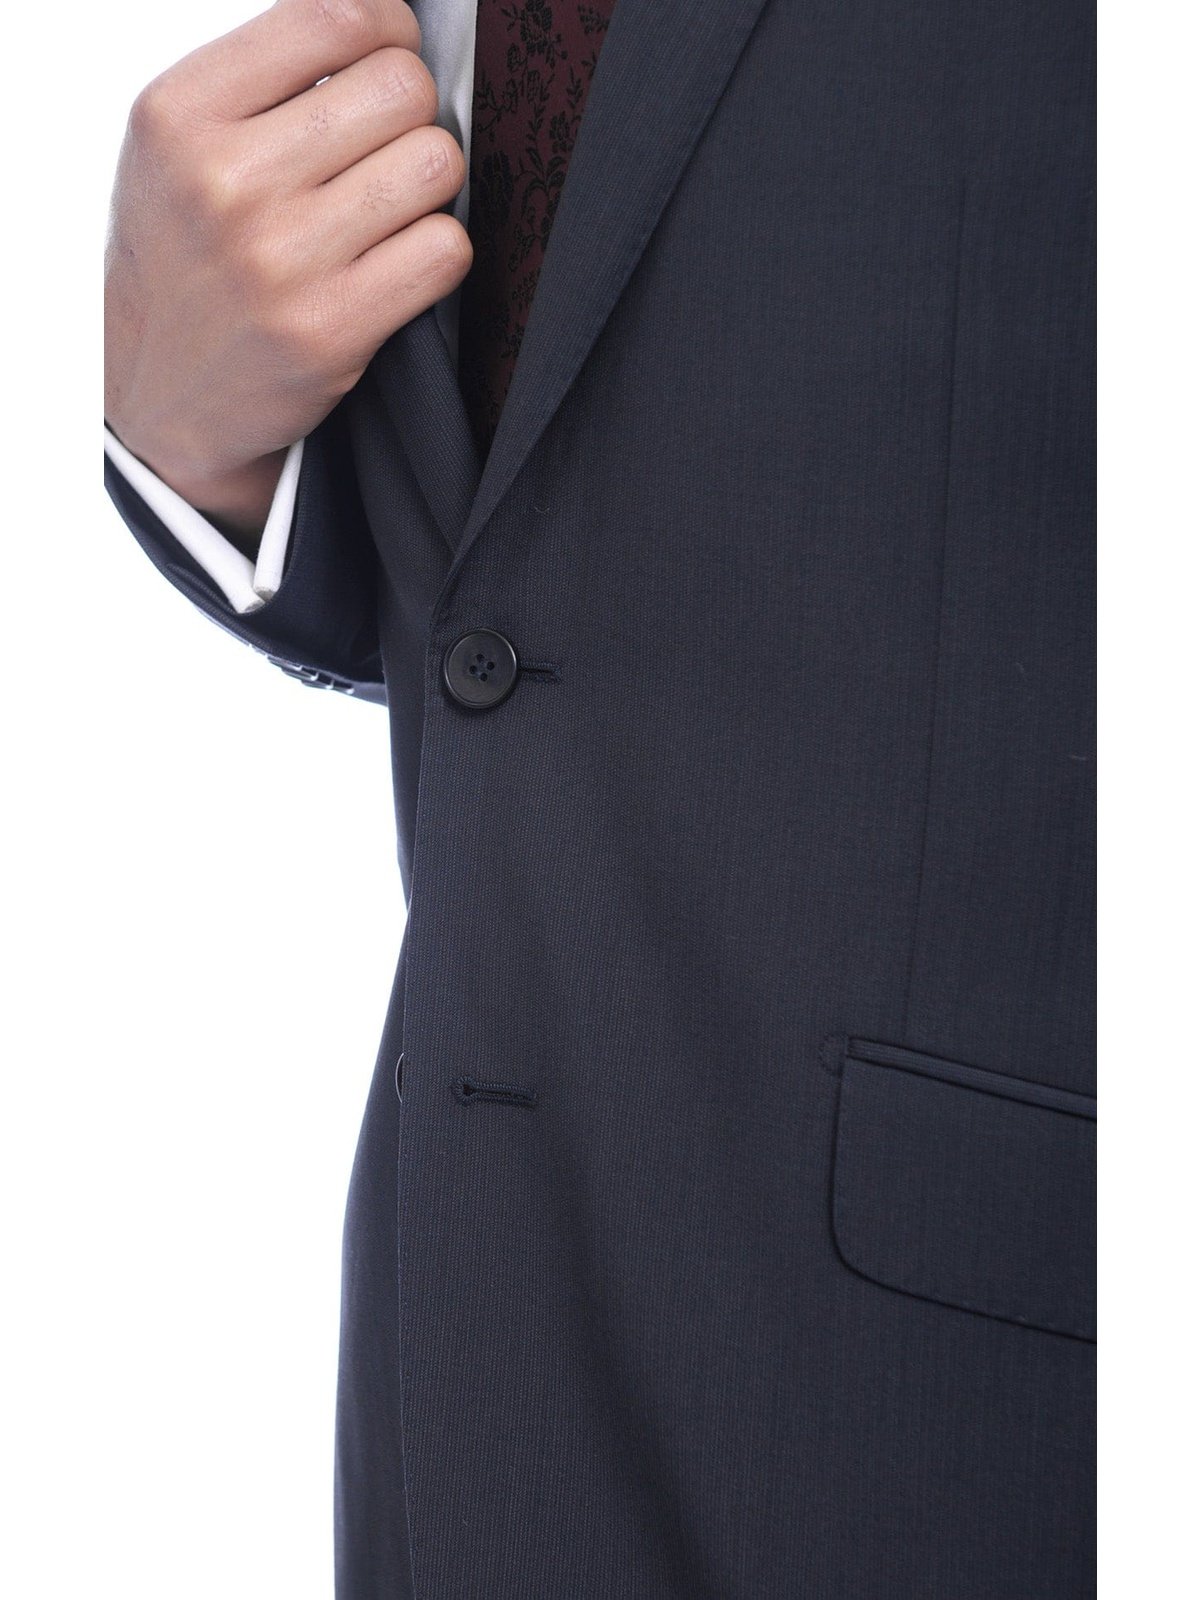 Napoli TWO PIECE SUITS Napoli Slim Fit Subtle Navy Pinstripe Half Canvassed Marzotto Wool Suit